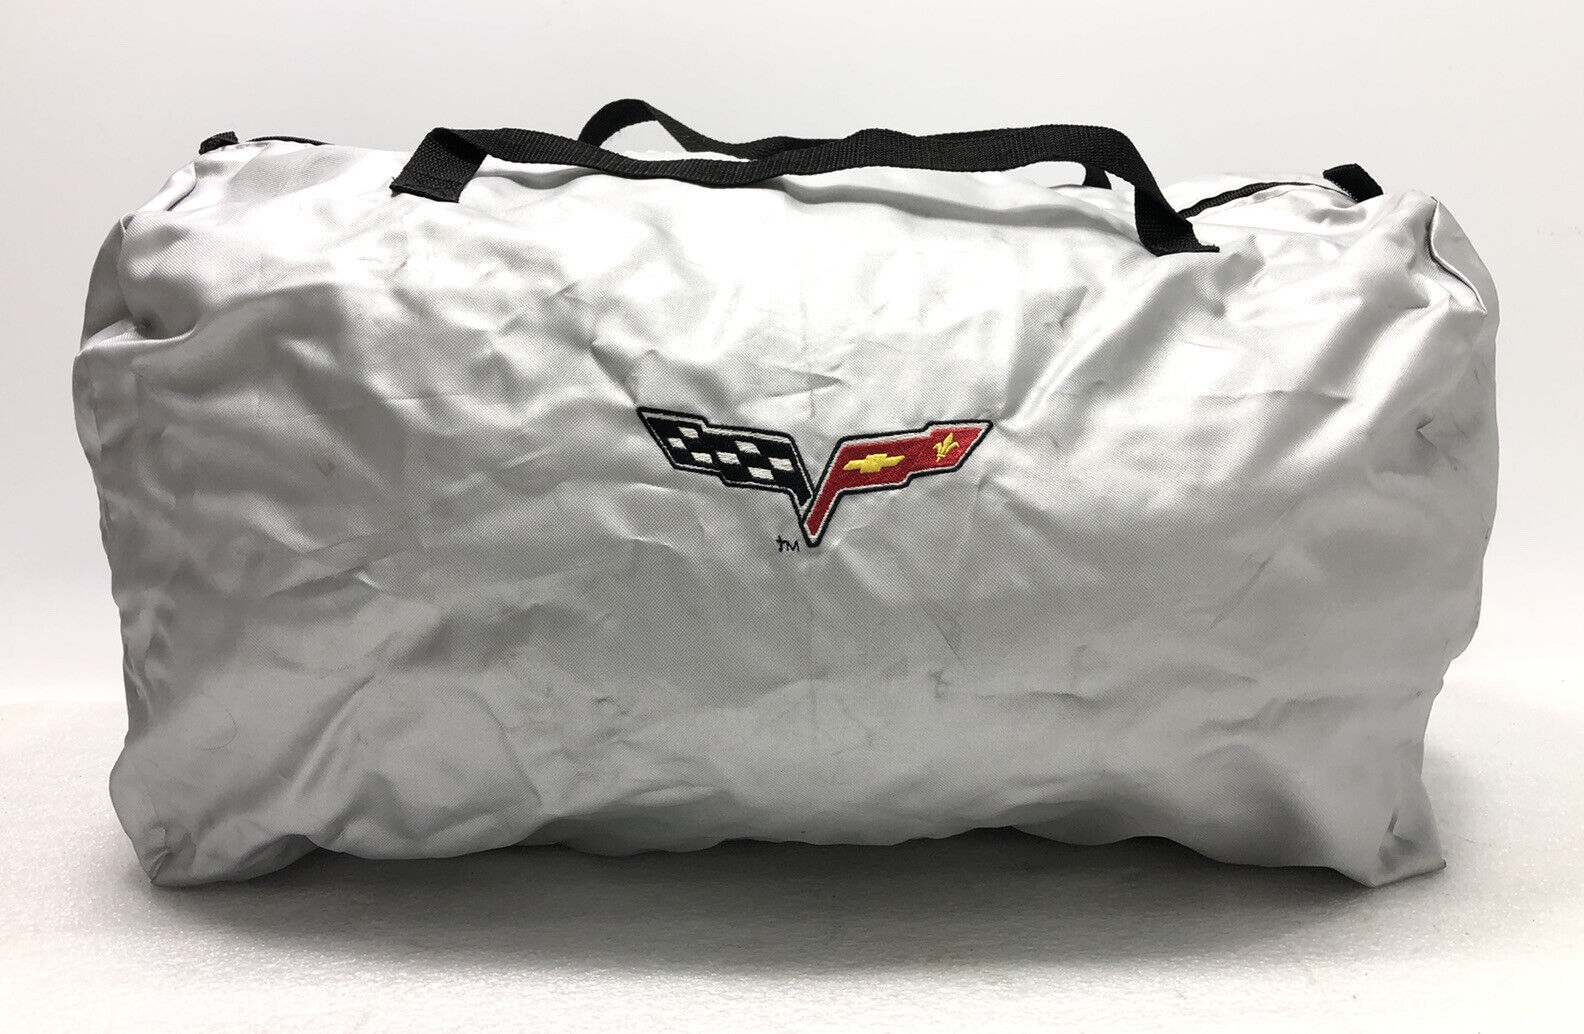 COVERKING SILVER CHEVY CORVETTE CAR COVER DUFFLE BAG RED/YELLOW 23Lx14Wx13H